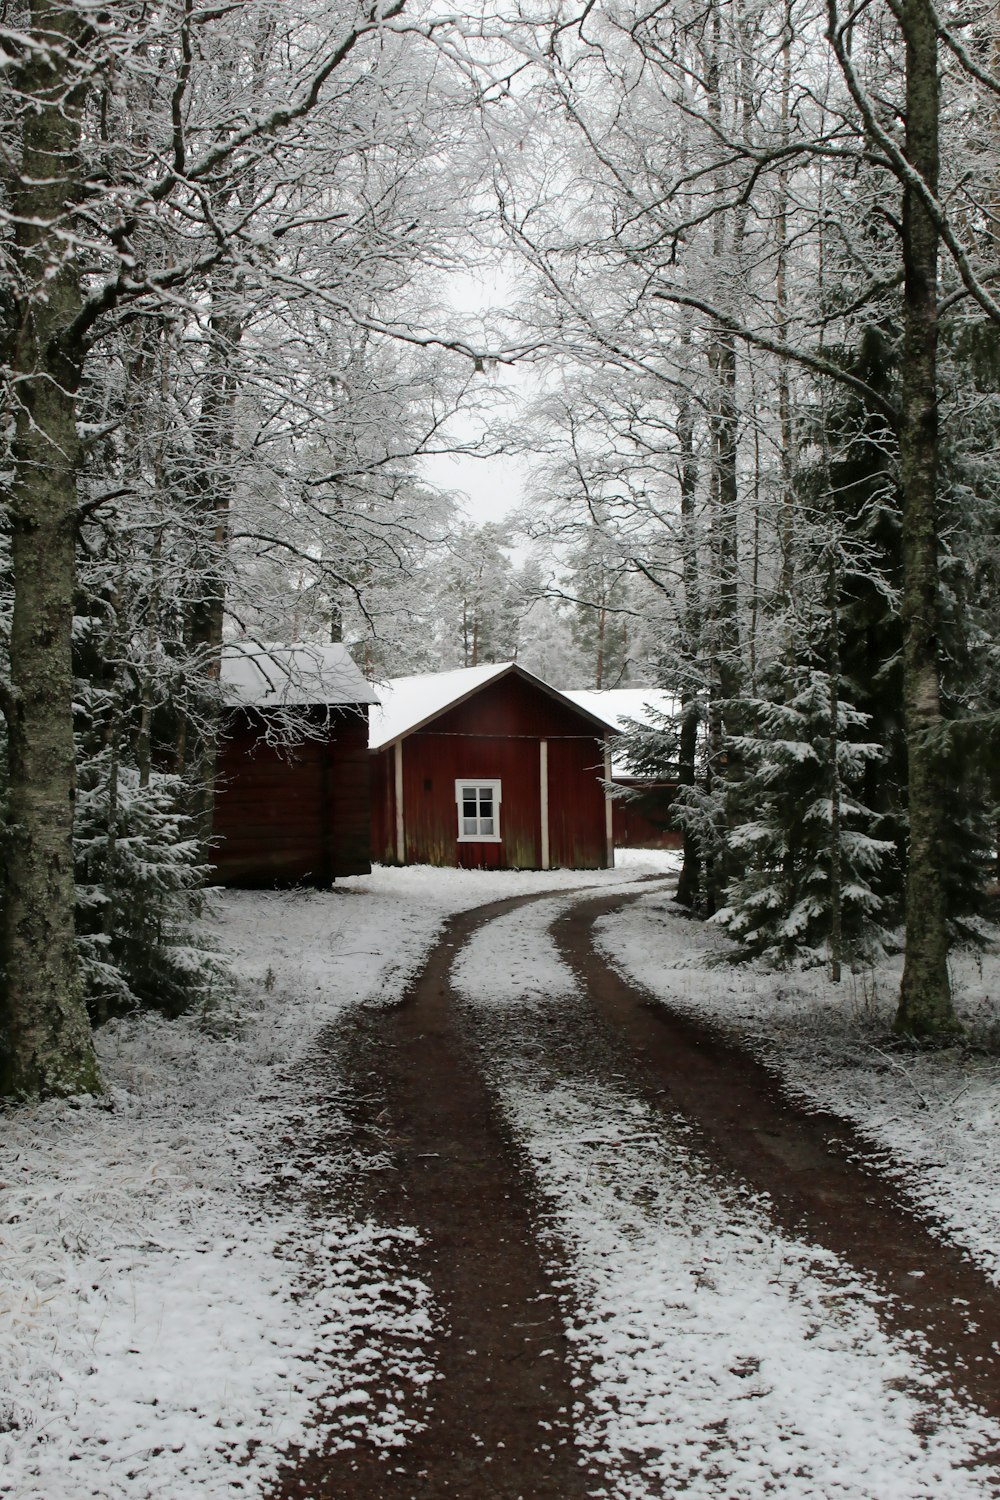 pathway leading to cabins in a snowy forest